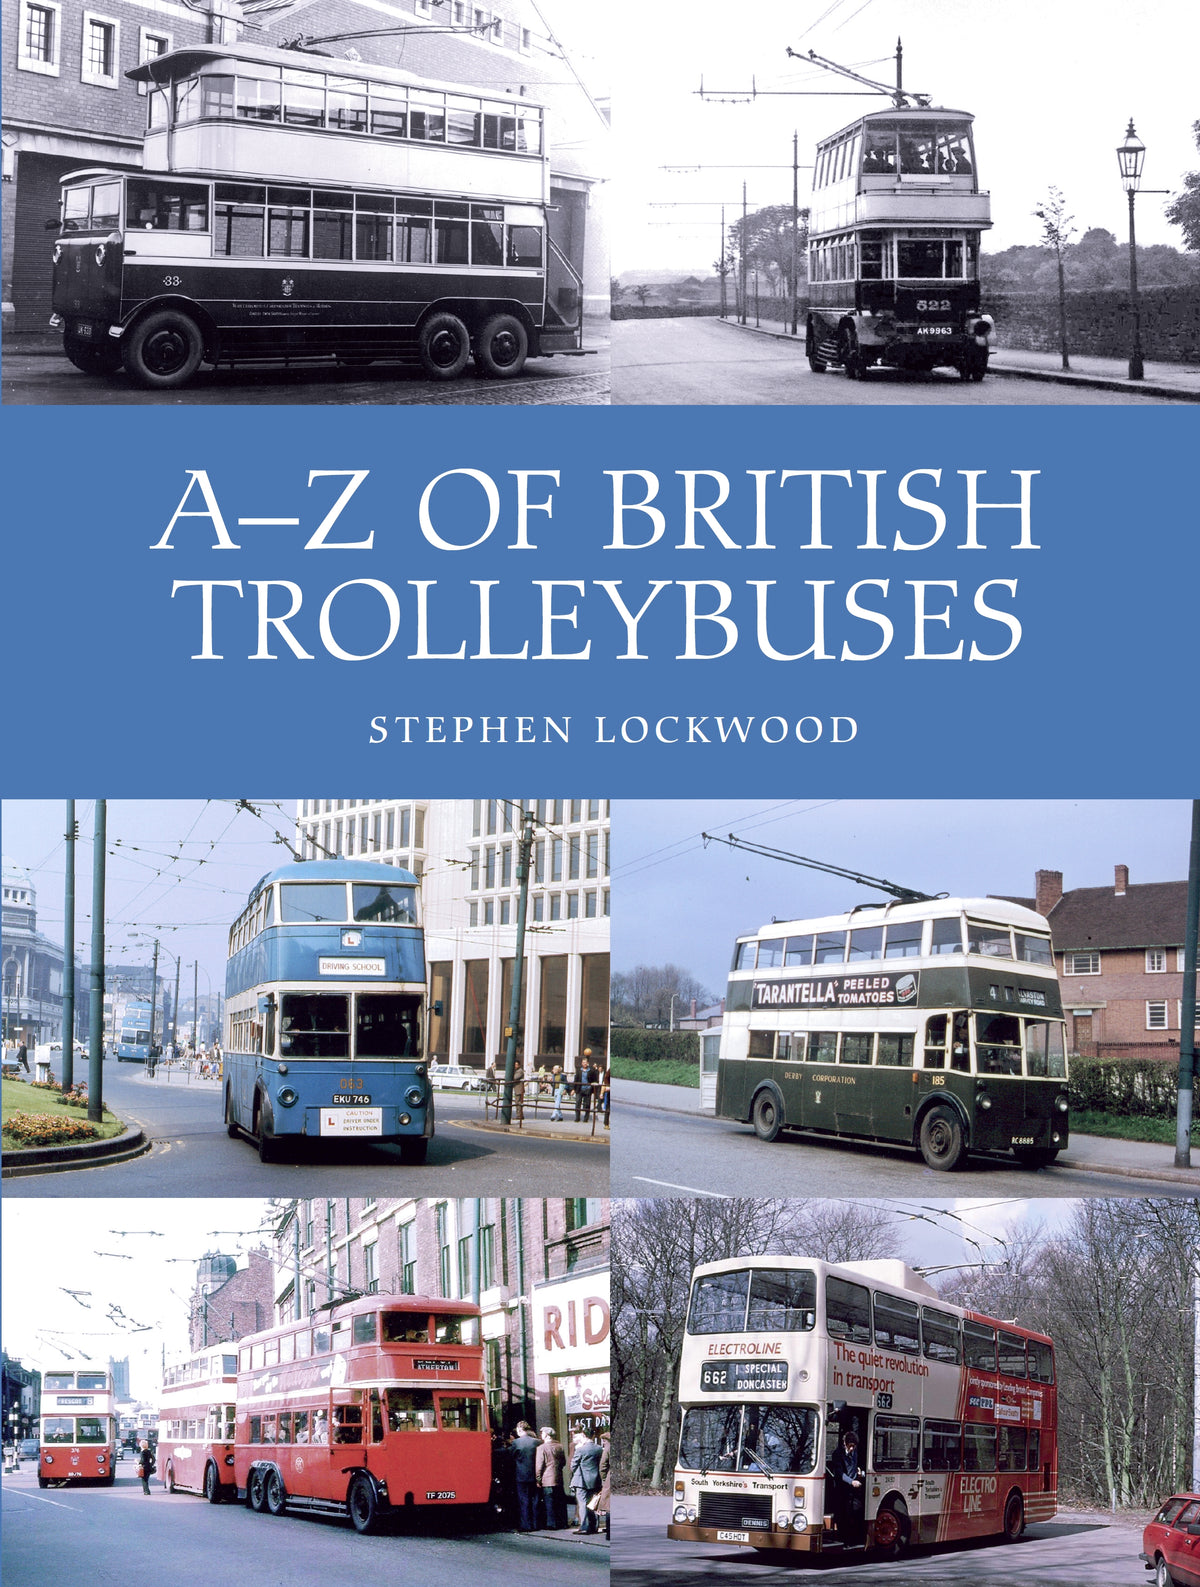 A-Z of British Trolleybuses